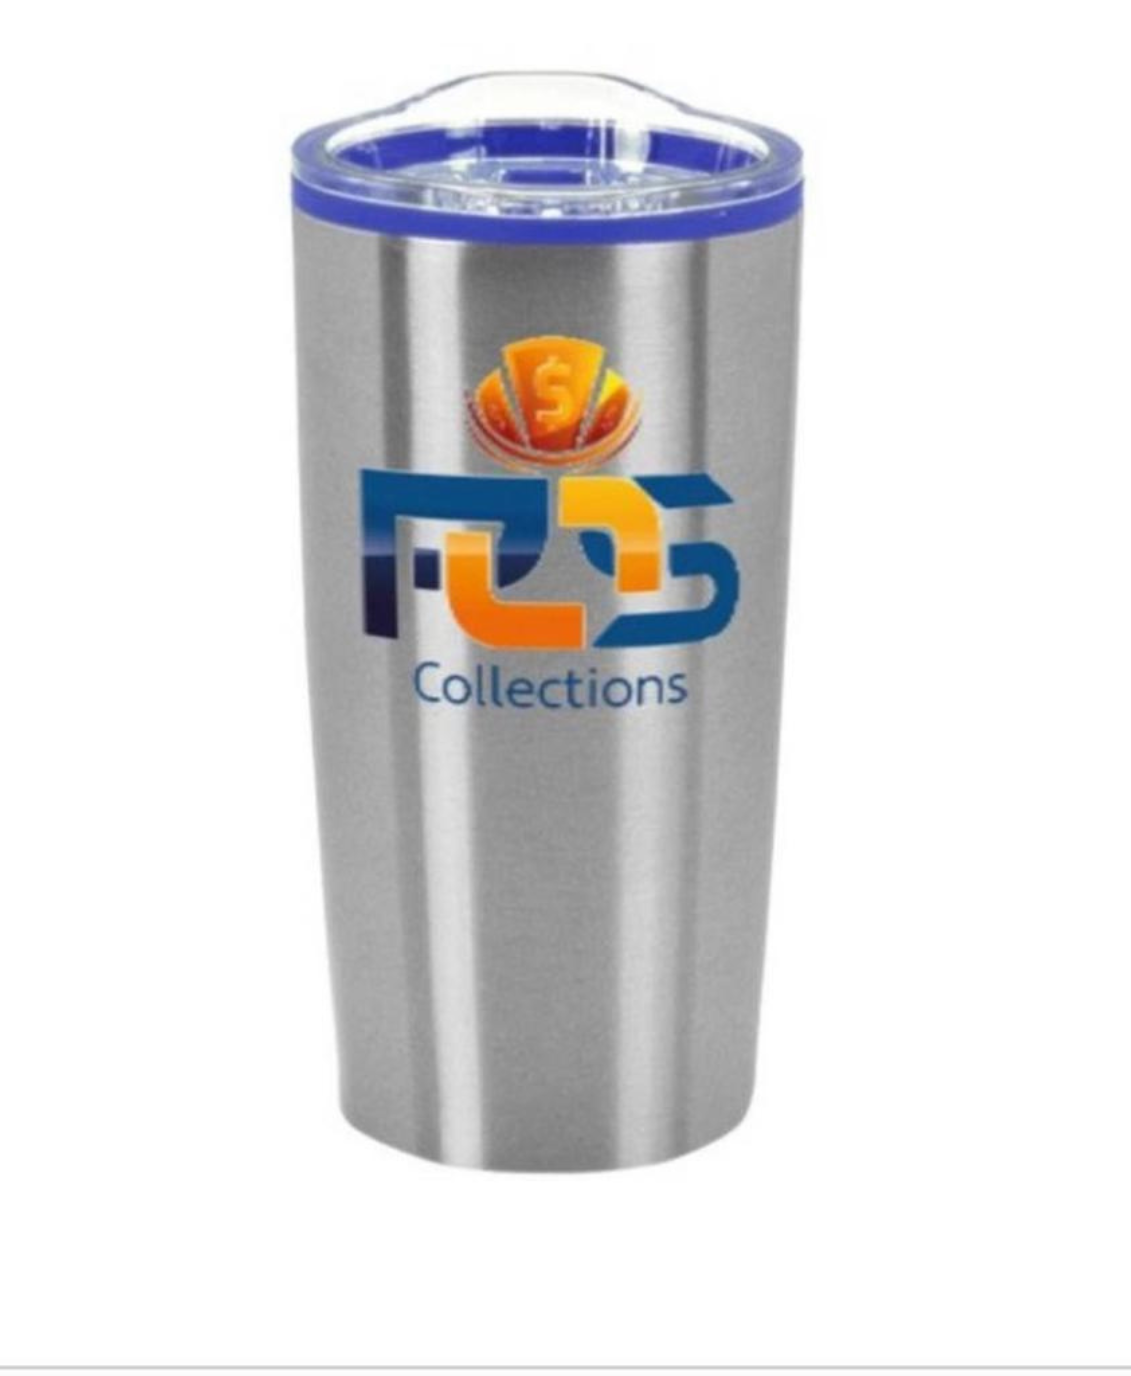 Pixiss Stainless Steel Tumblers 4-Pack 20oz Double Wall Vacuum Insulated